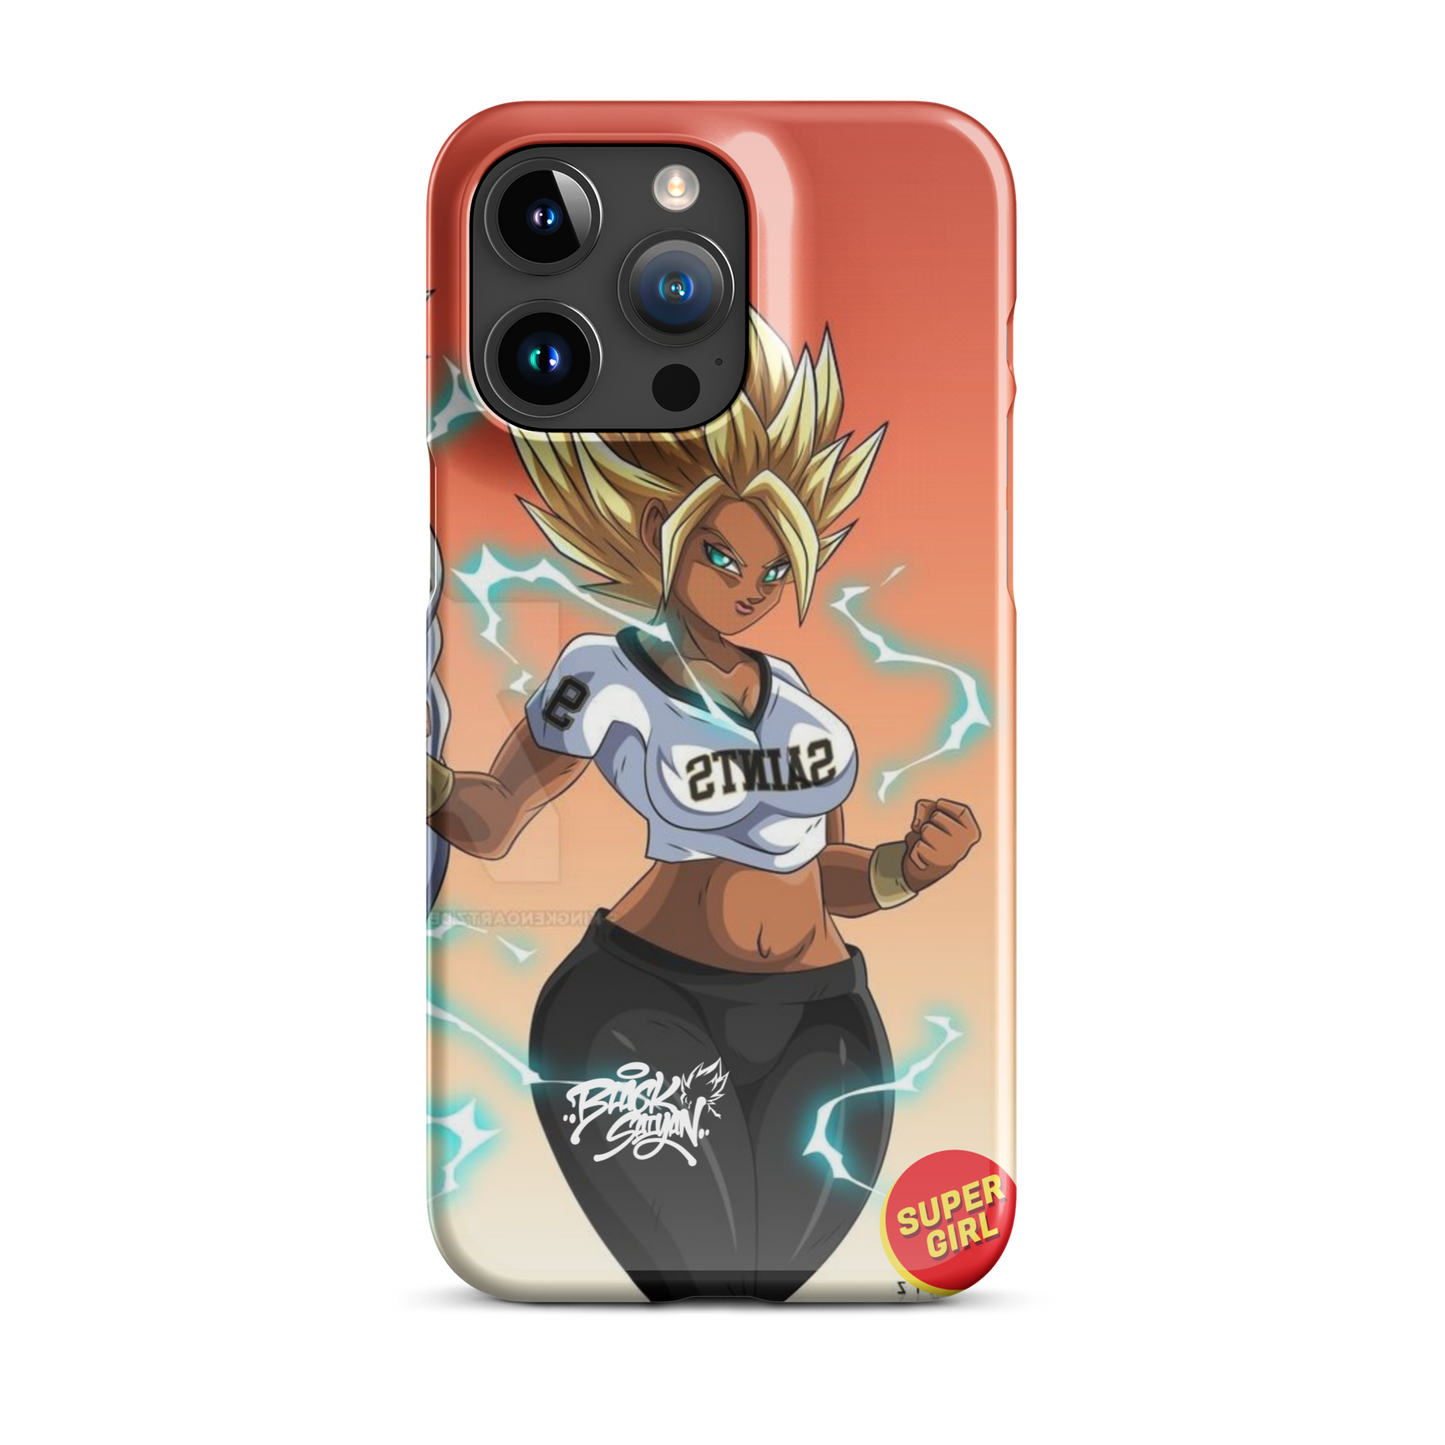 BLACK SAIYAN 2/2 COUPLE MATCHING PHONE CASES - Snap case for iPhone®